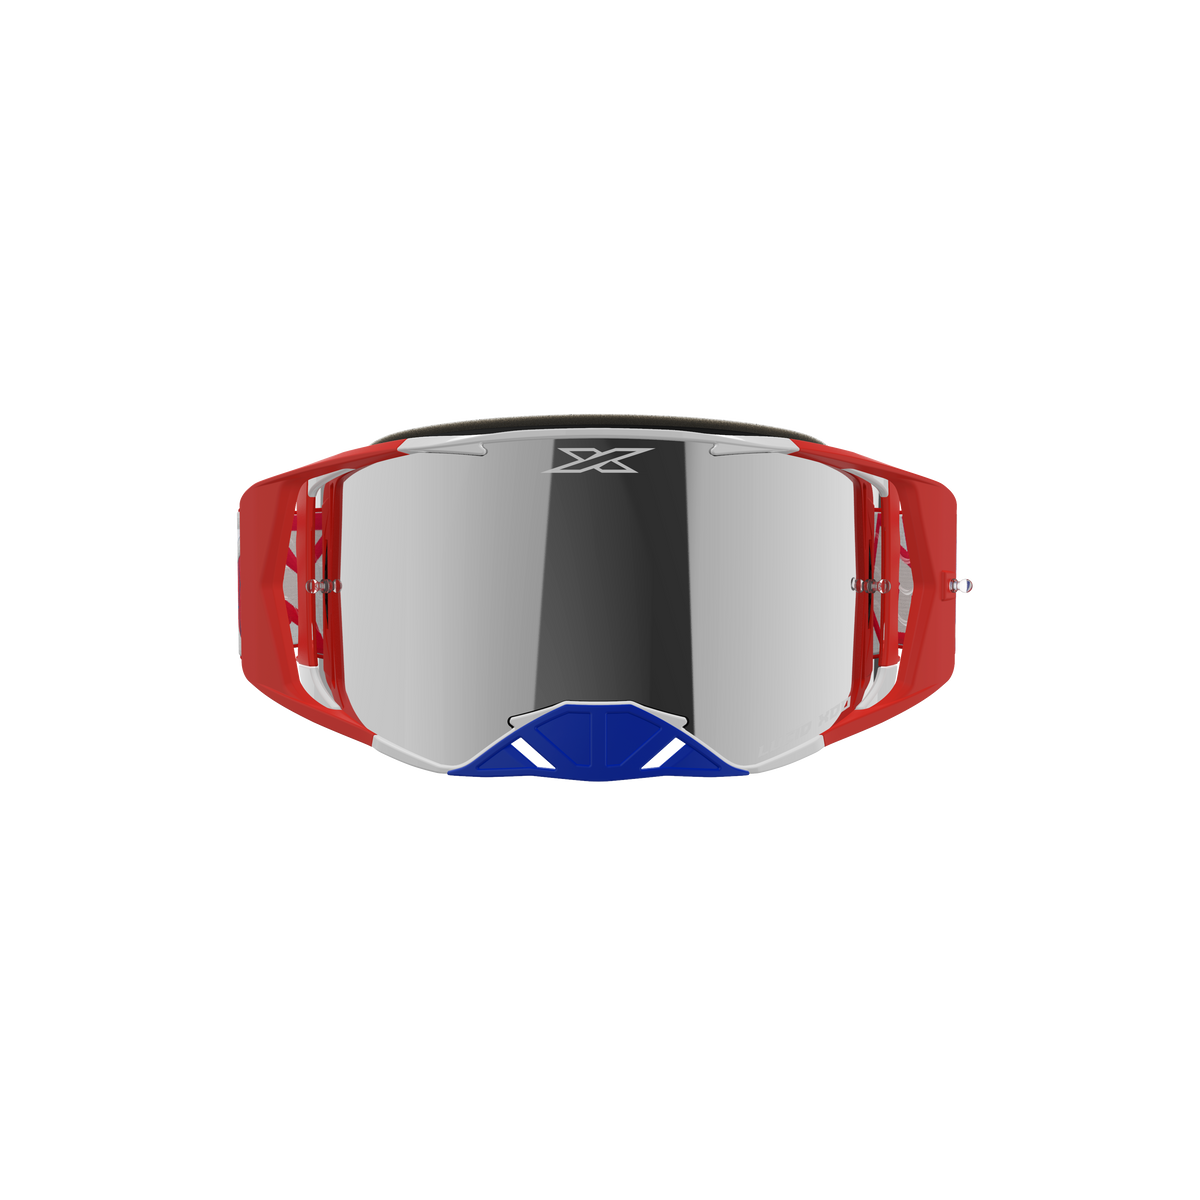 Lucid Goggle Red, White, &amp; Metallic Blue - Silver Mirror